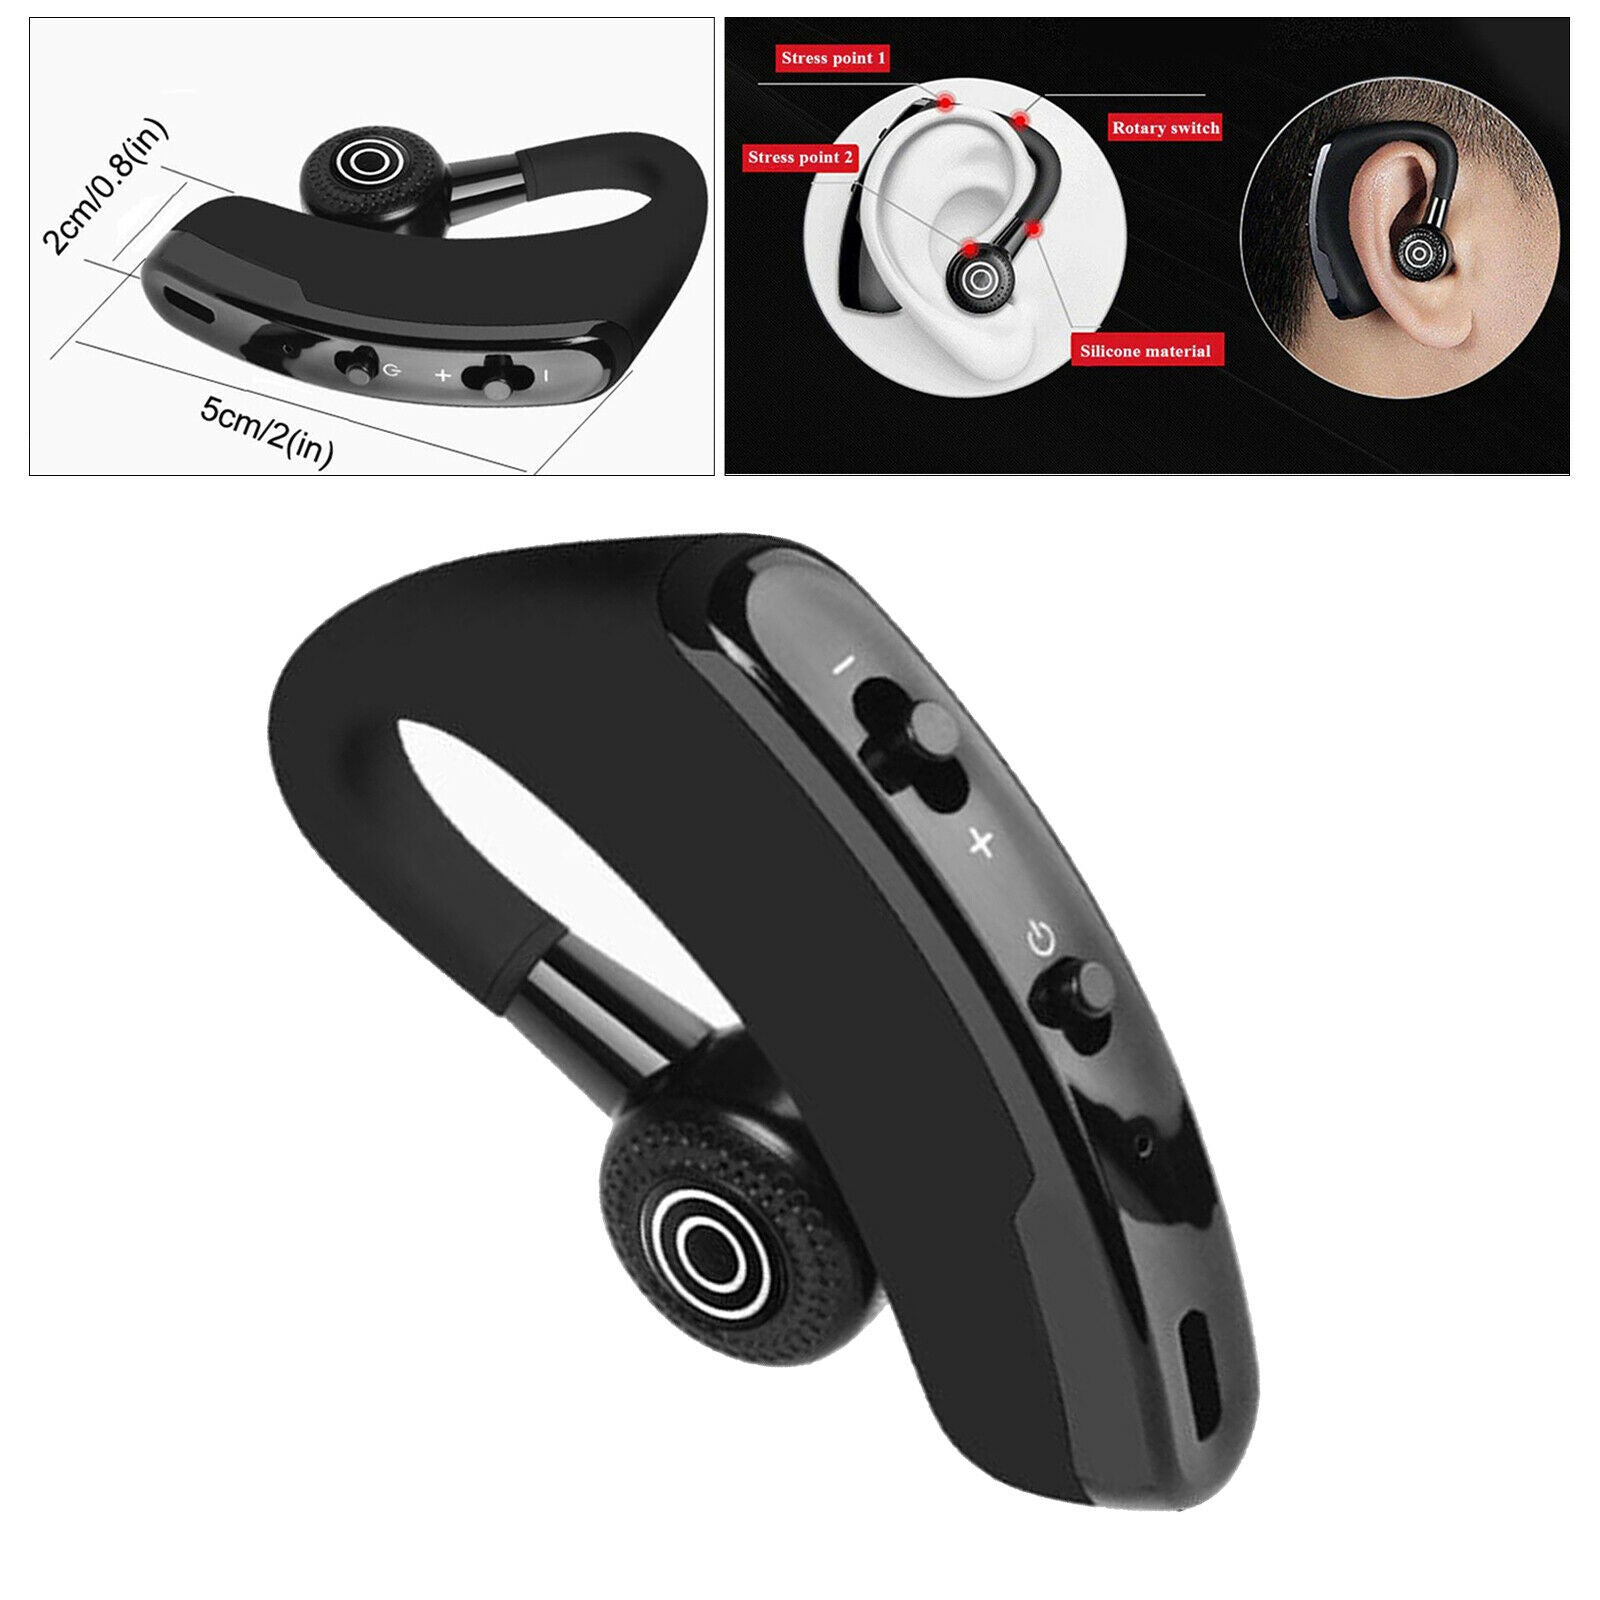 Wireless Handsfree Bluetooth Headset CVC6.0 for Cell Phone Driving Business